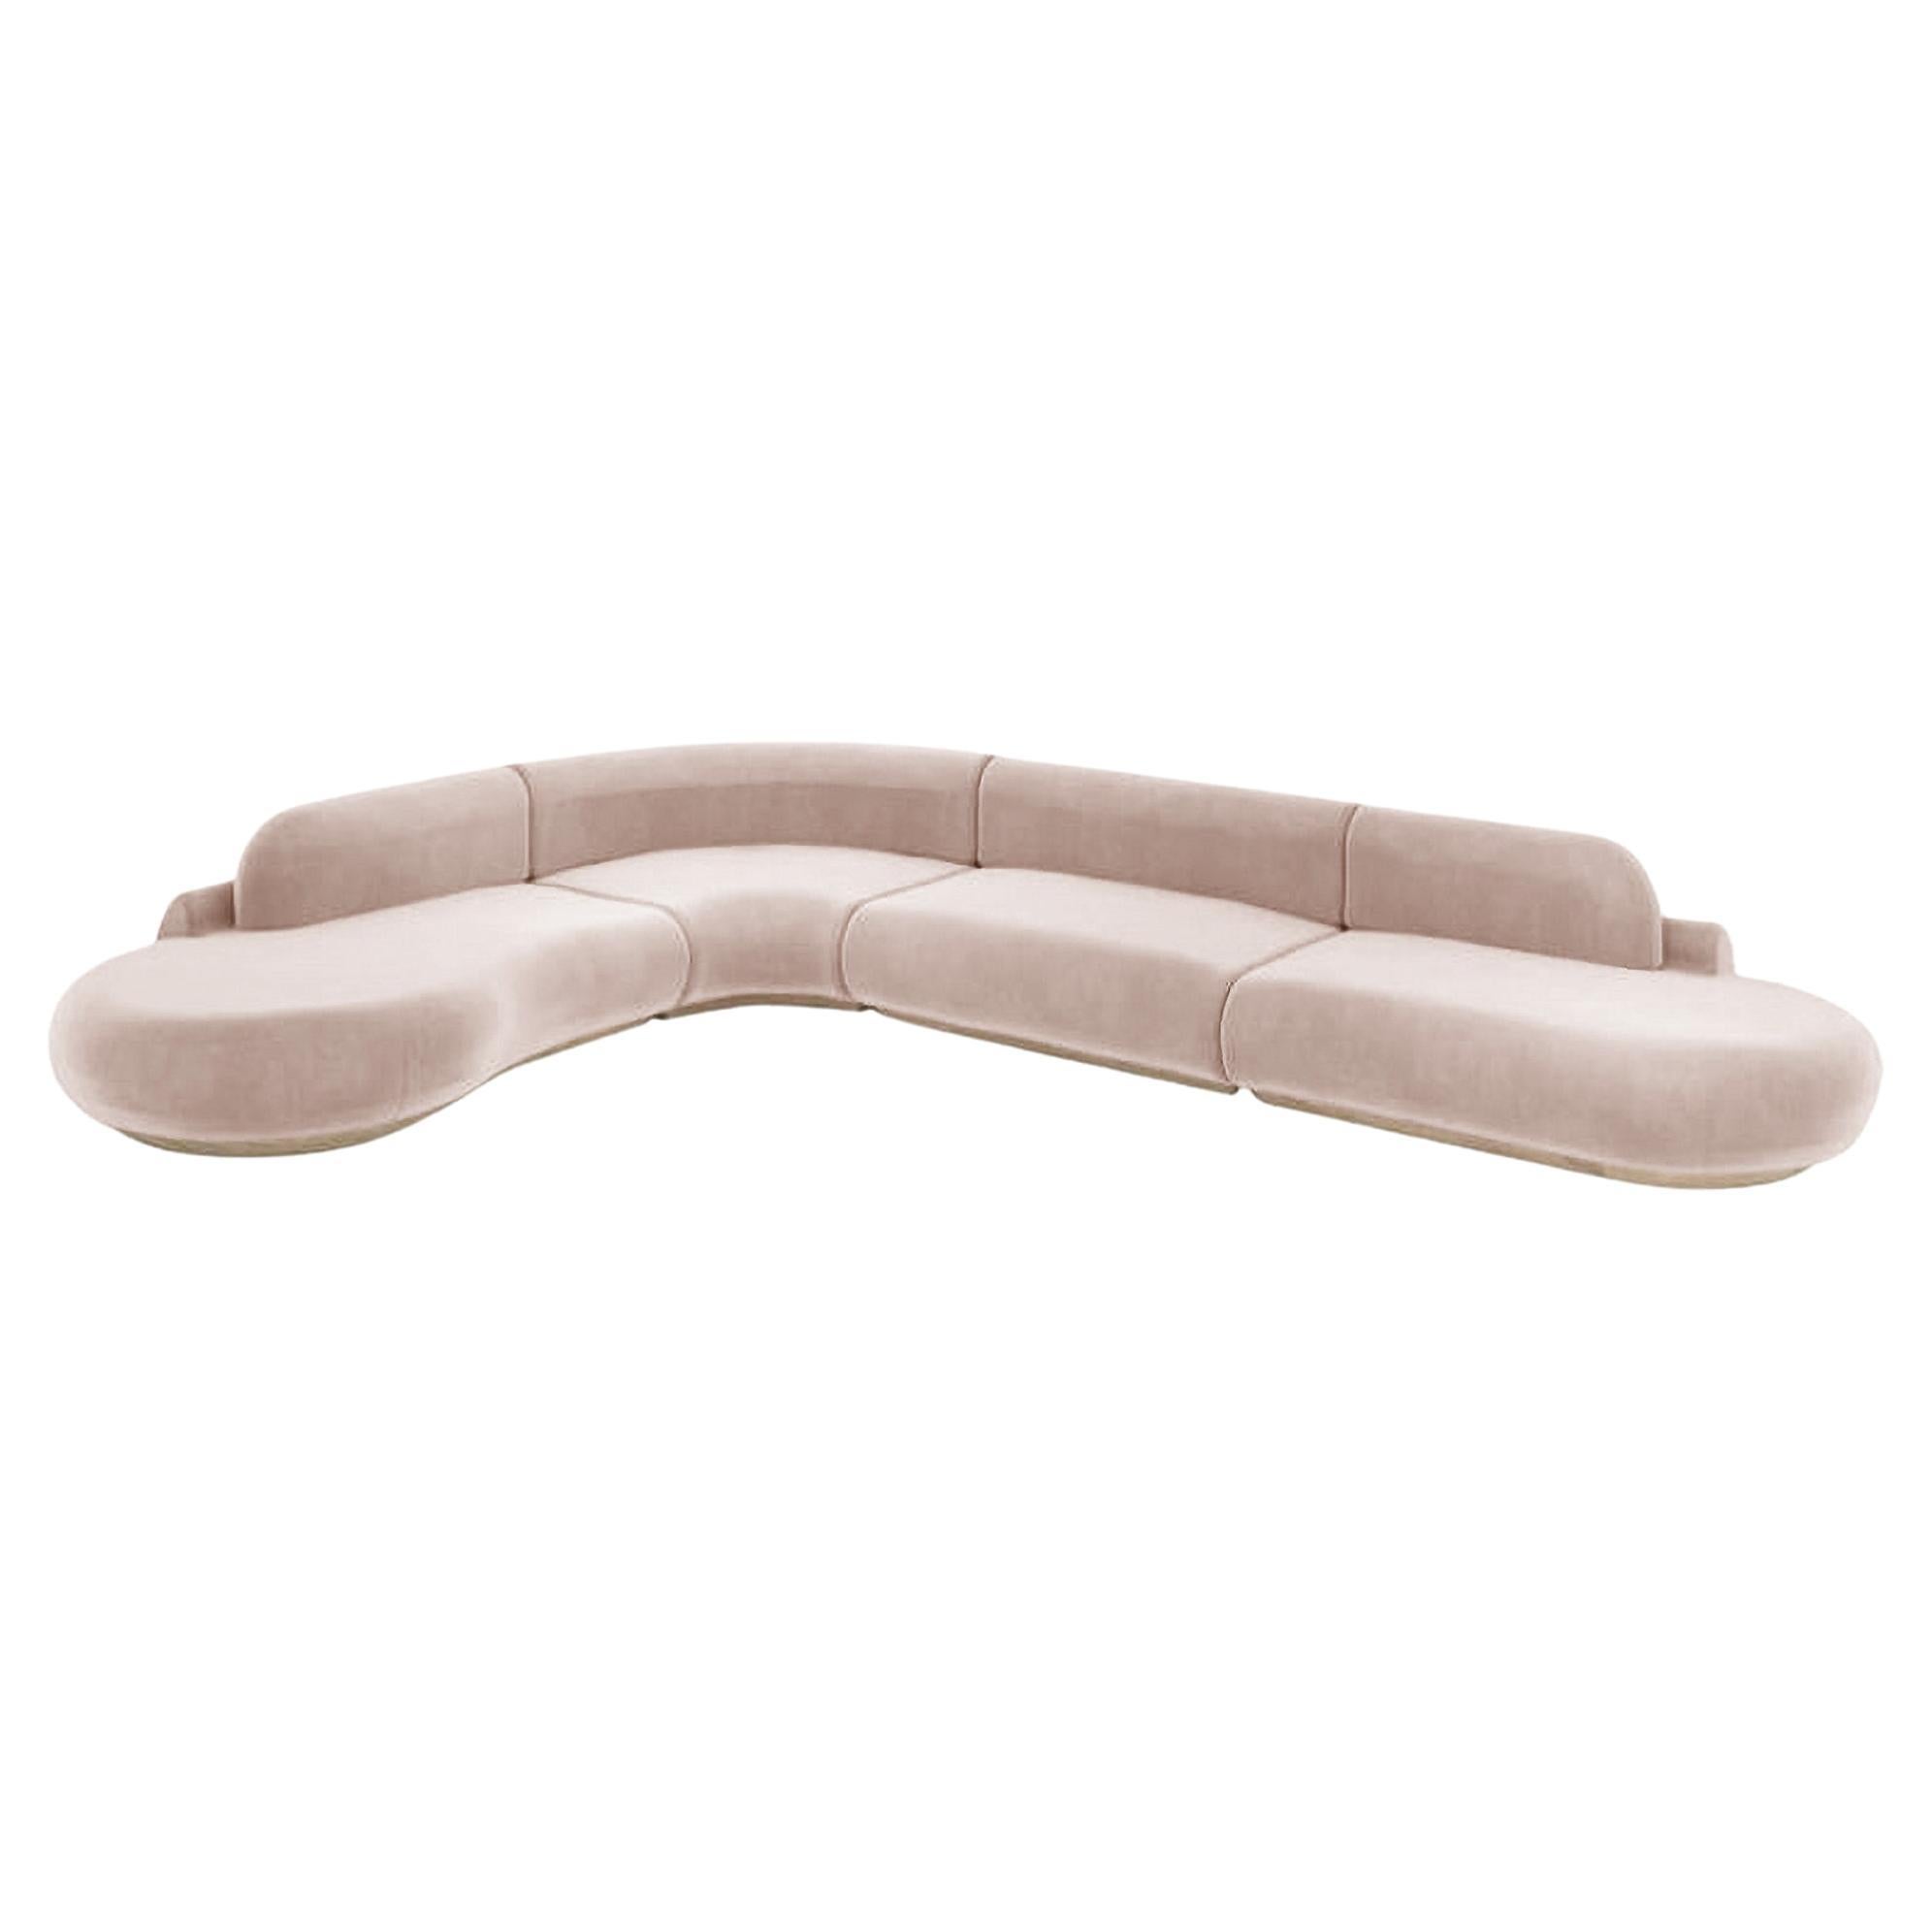 Naked Curved Sectional Sofa, 4 Piece with Natural Oak and Vigo Blossom For Sale